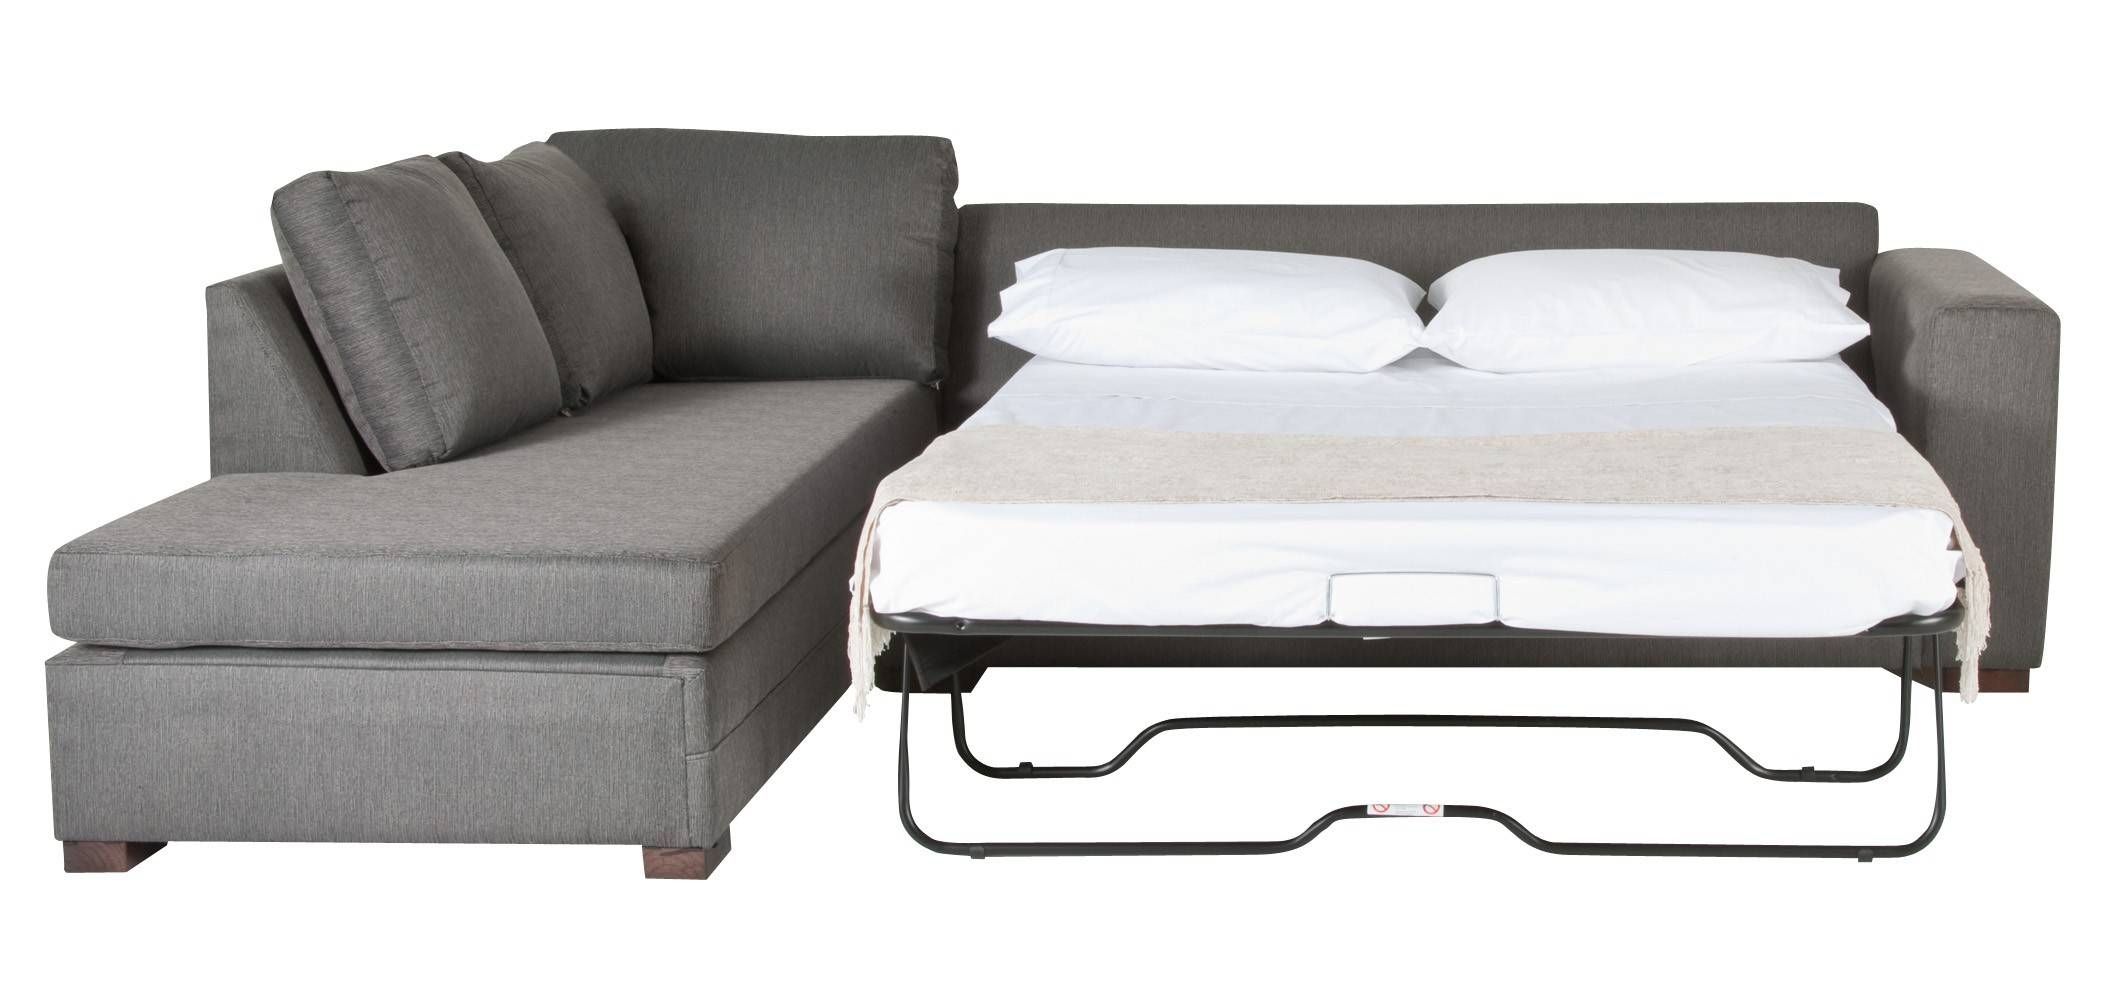 pull out sofa bed canada